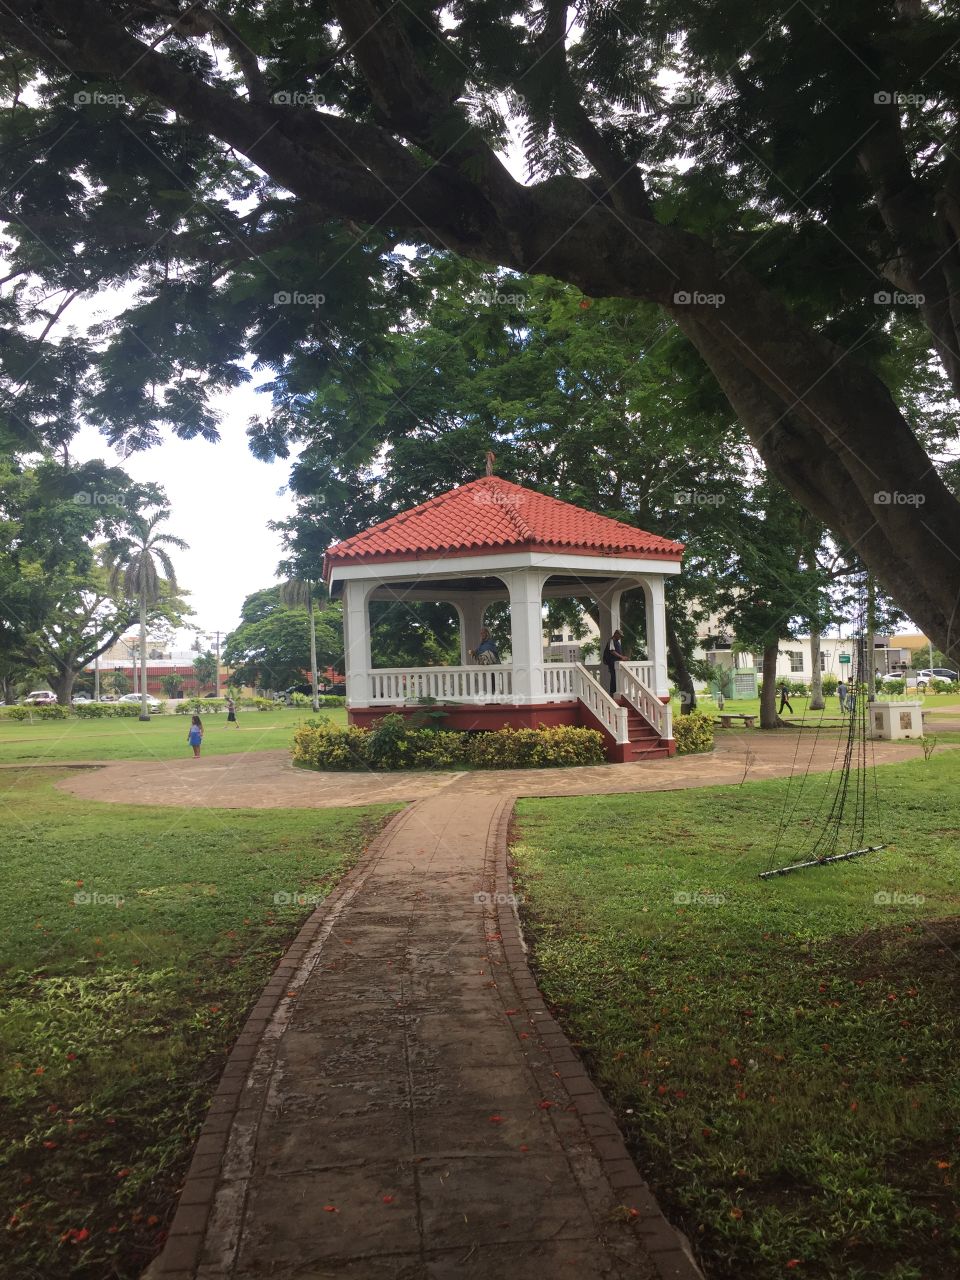 The Kiosko was originally located in front of the governors palace on Guam then moved to Spanish plaza to allow that a baseball field to be built in its place